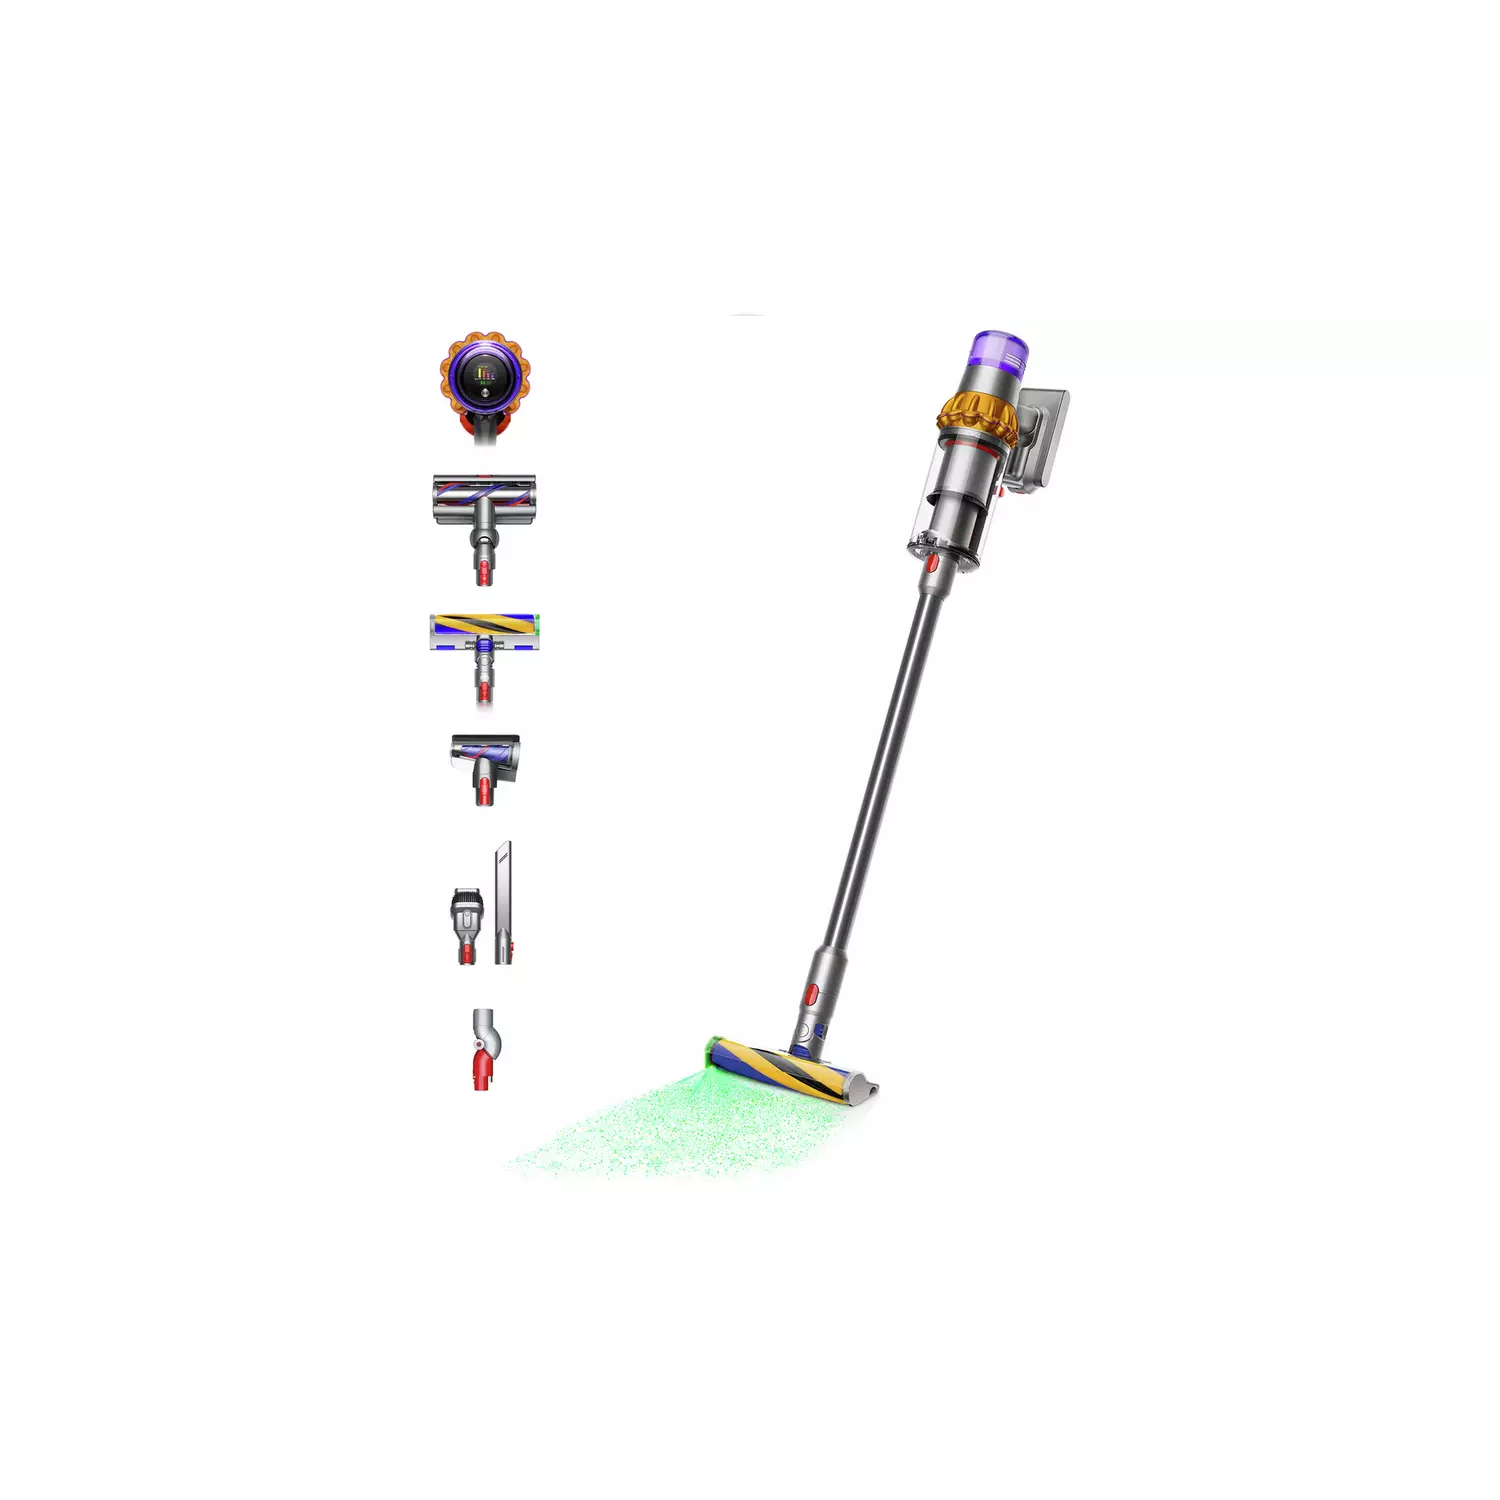 DYSON V15 Detect Cordless Vacuum Cleaner – Iron & Nickel